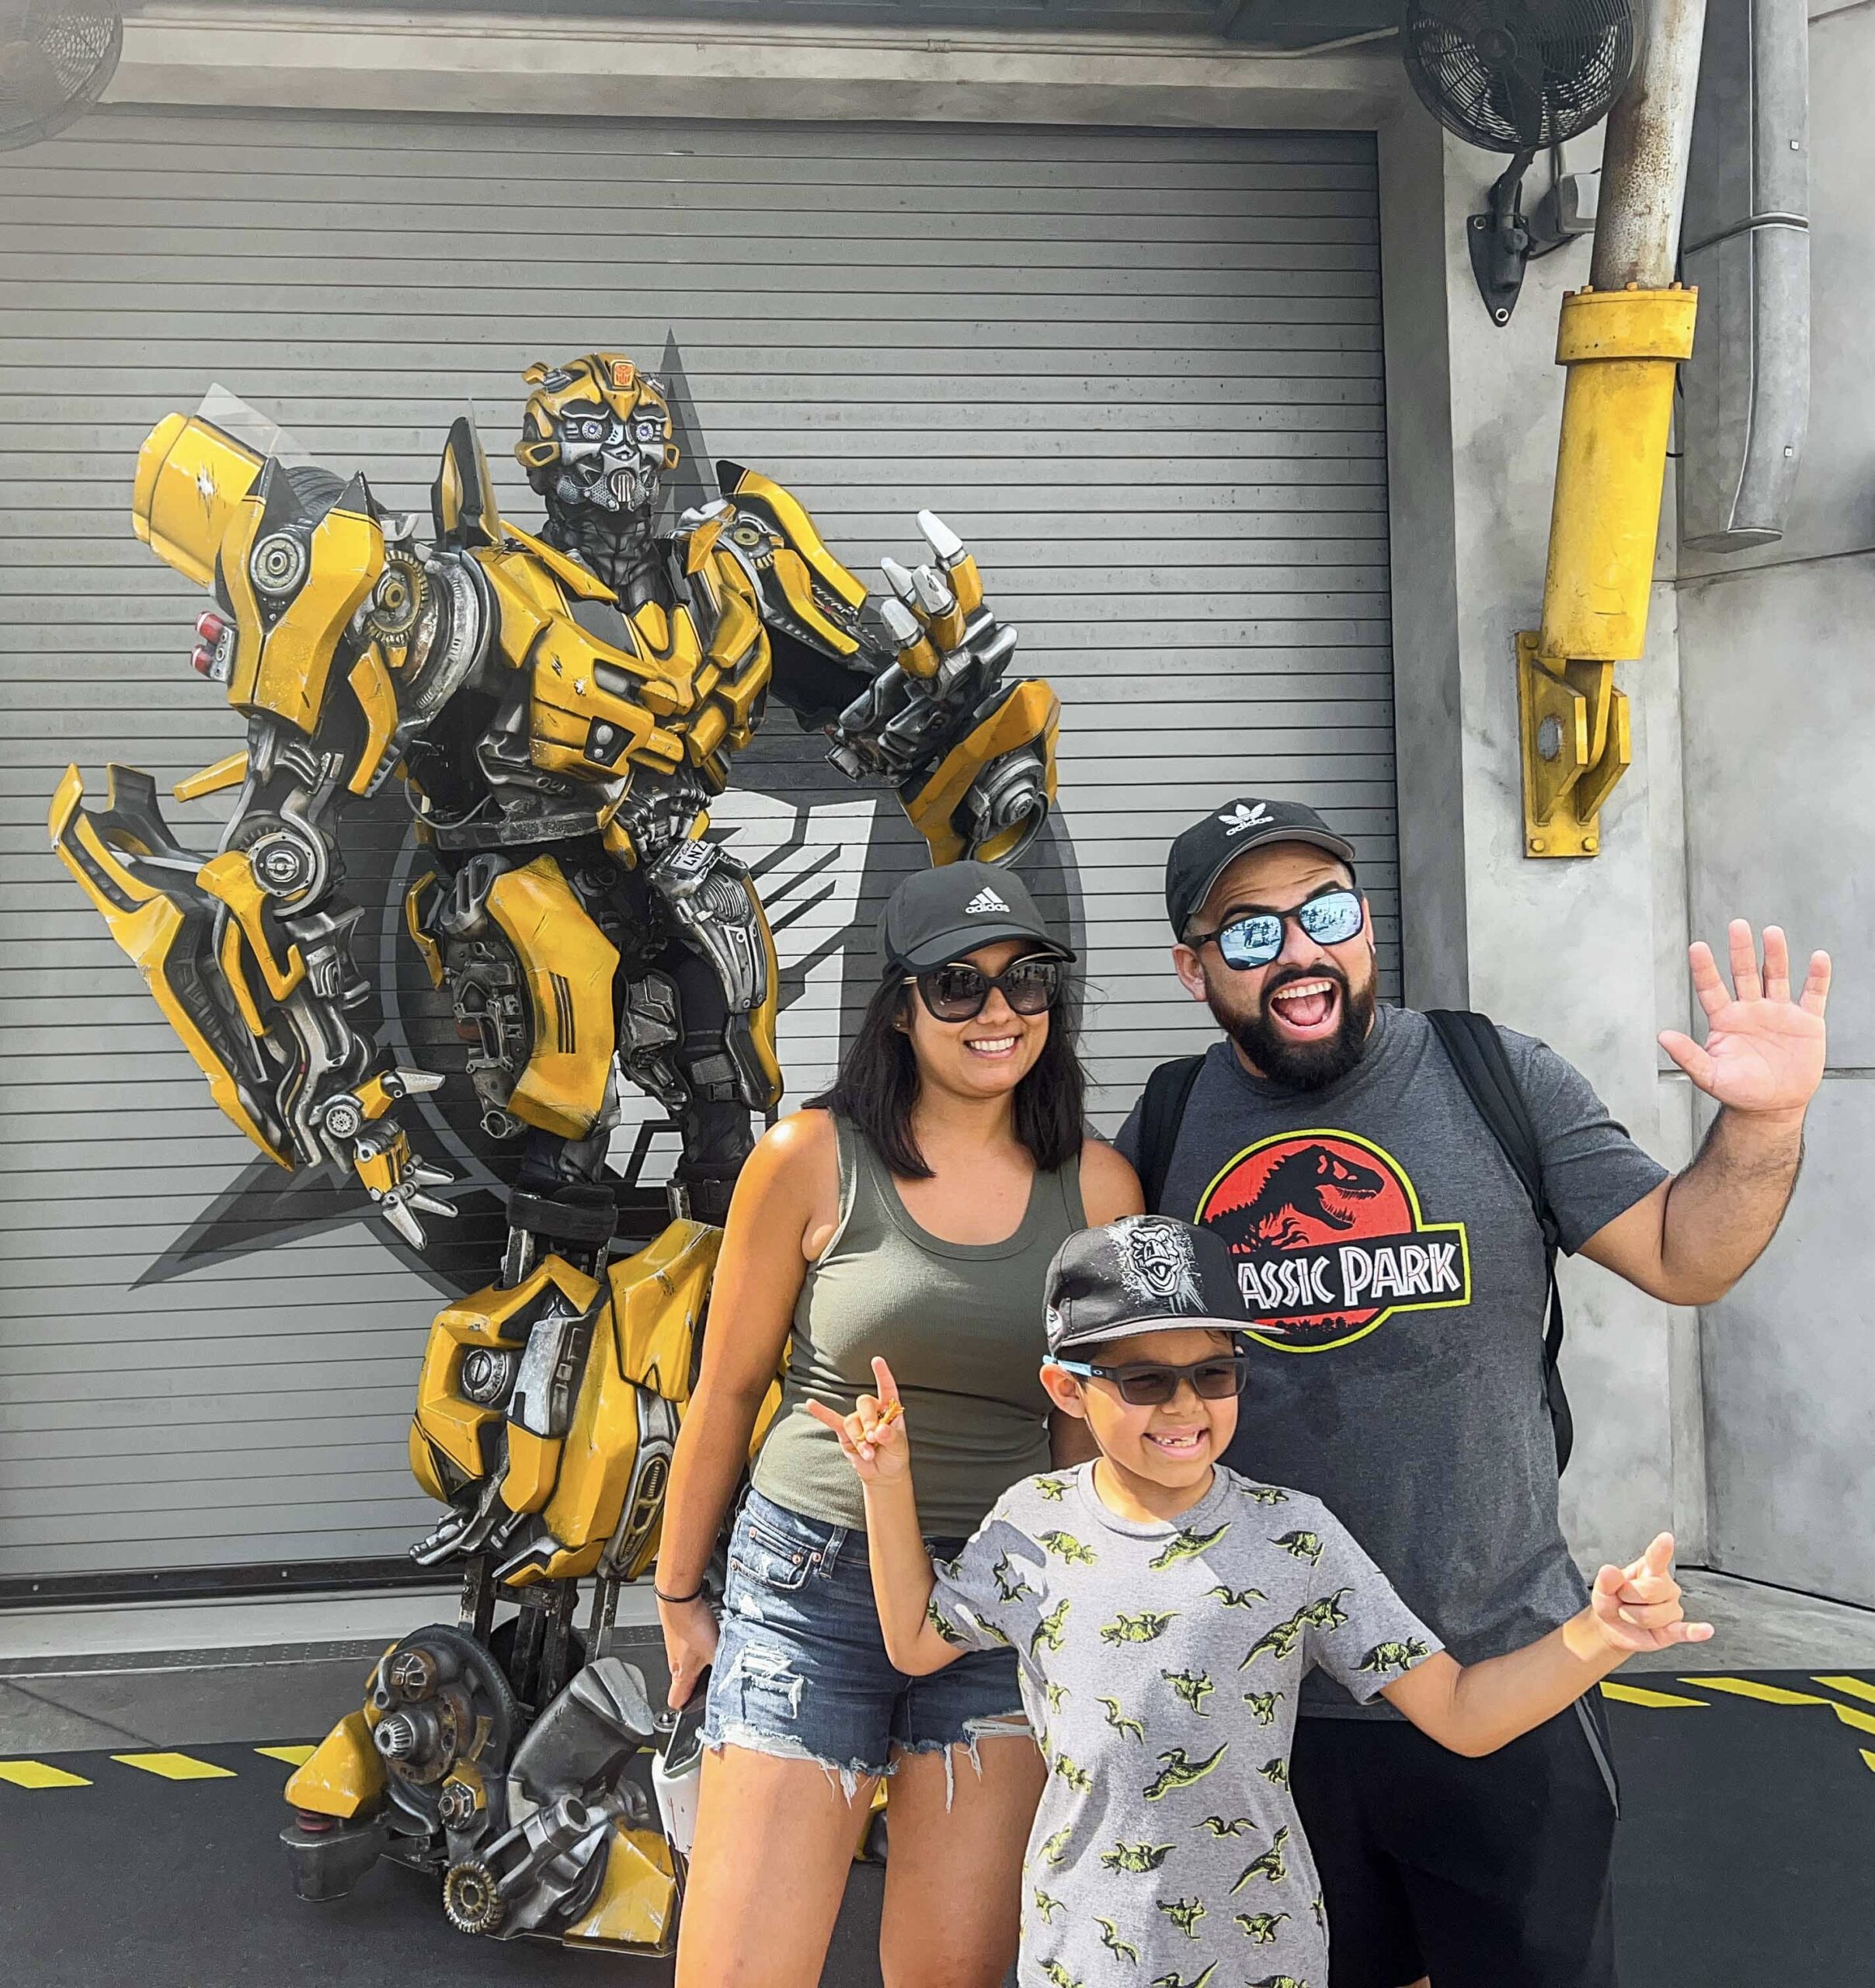 Best Attractions And Rides At Universal Studios For Kids